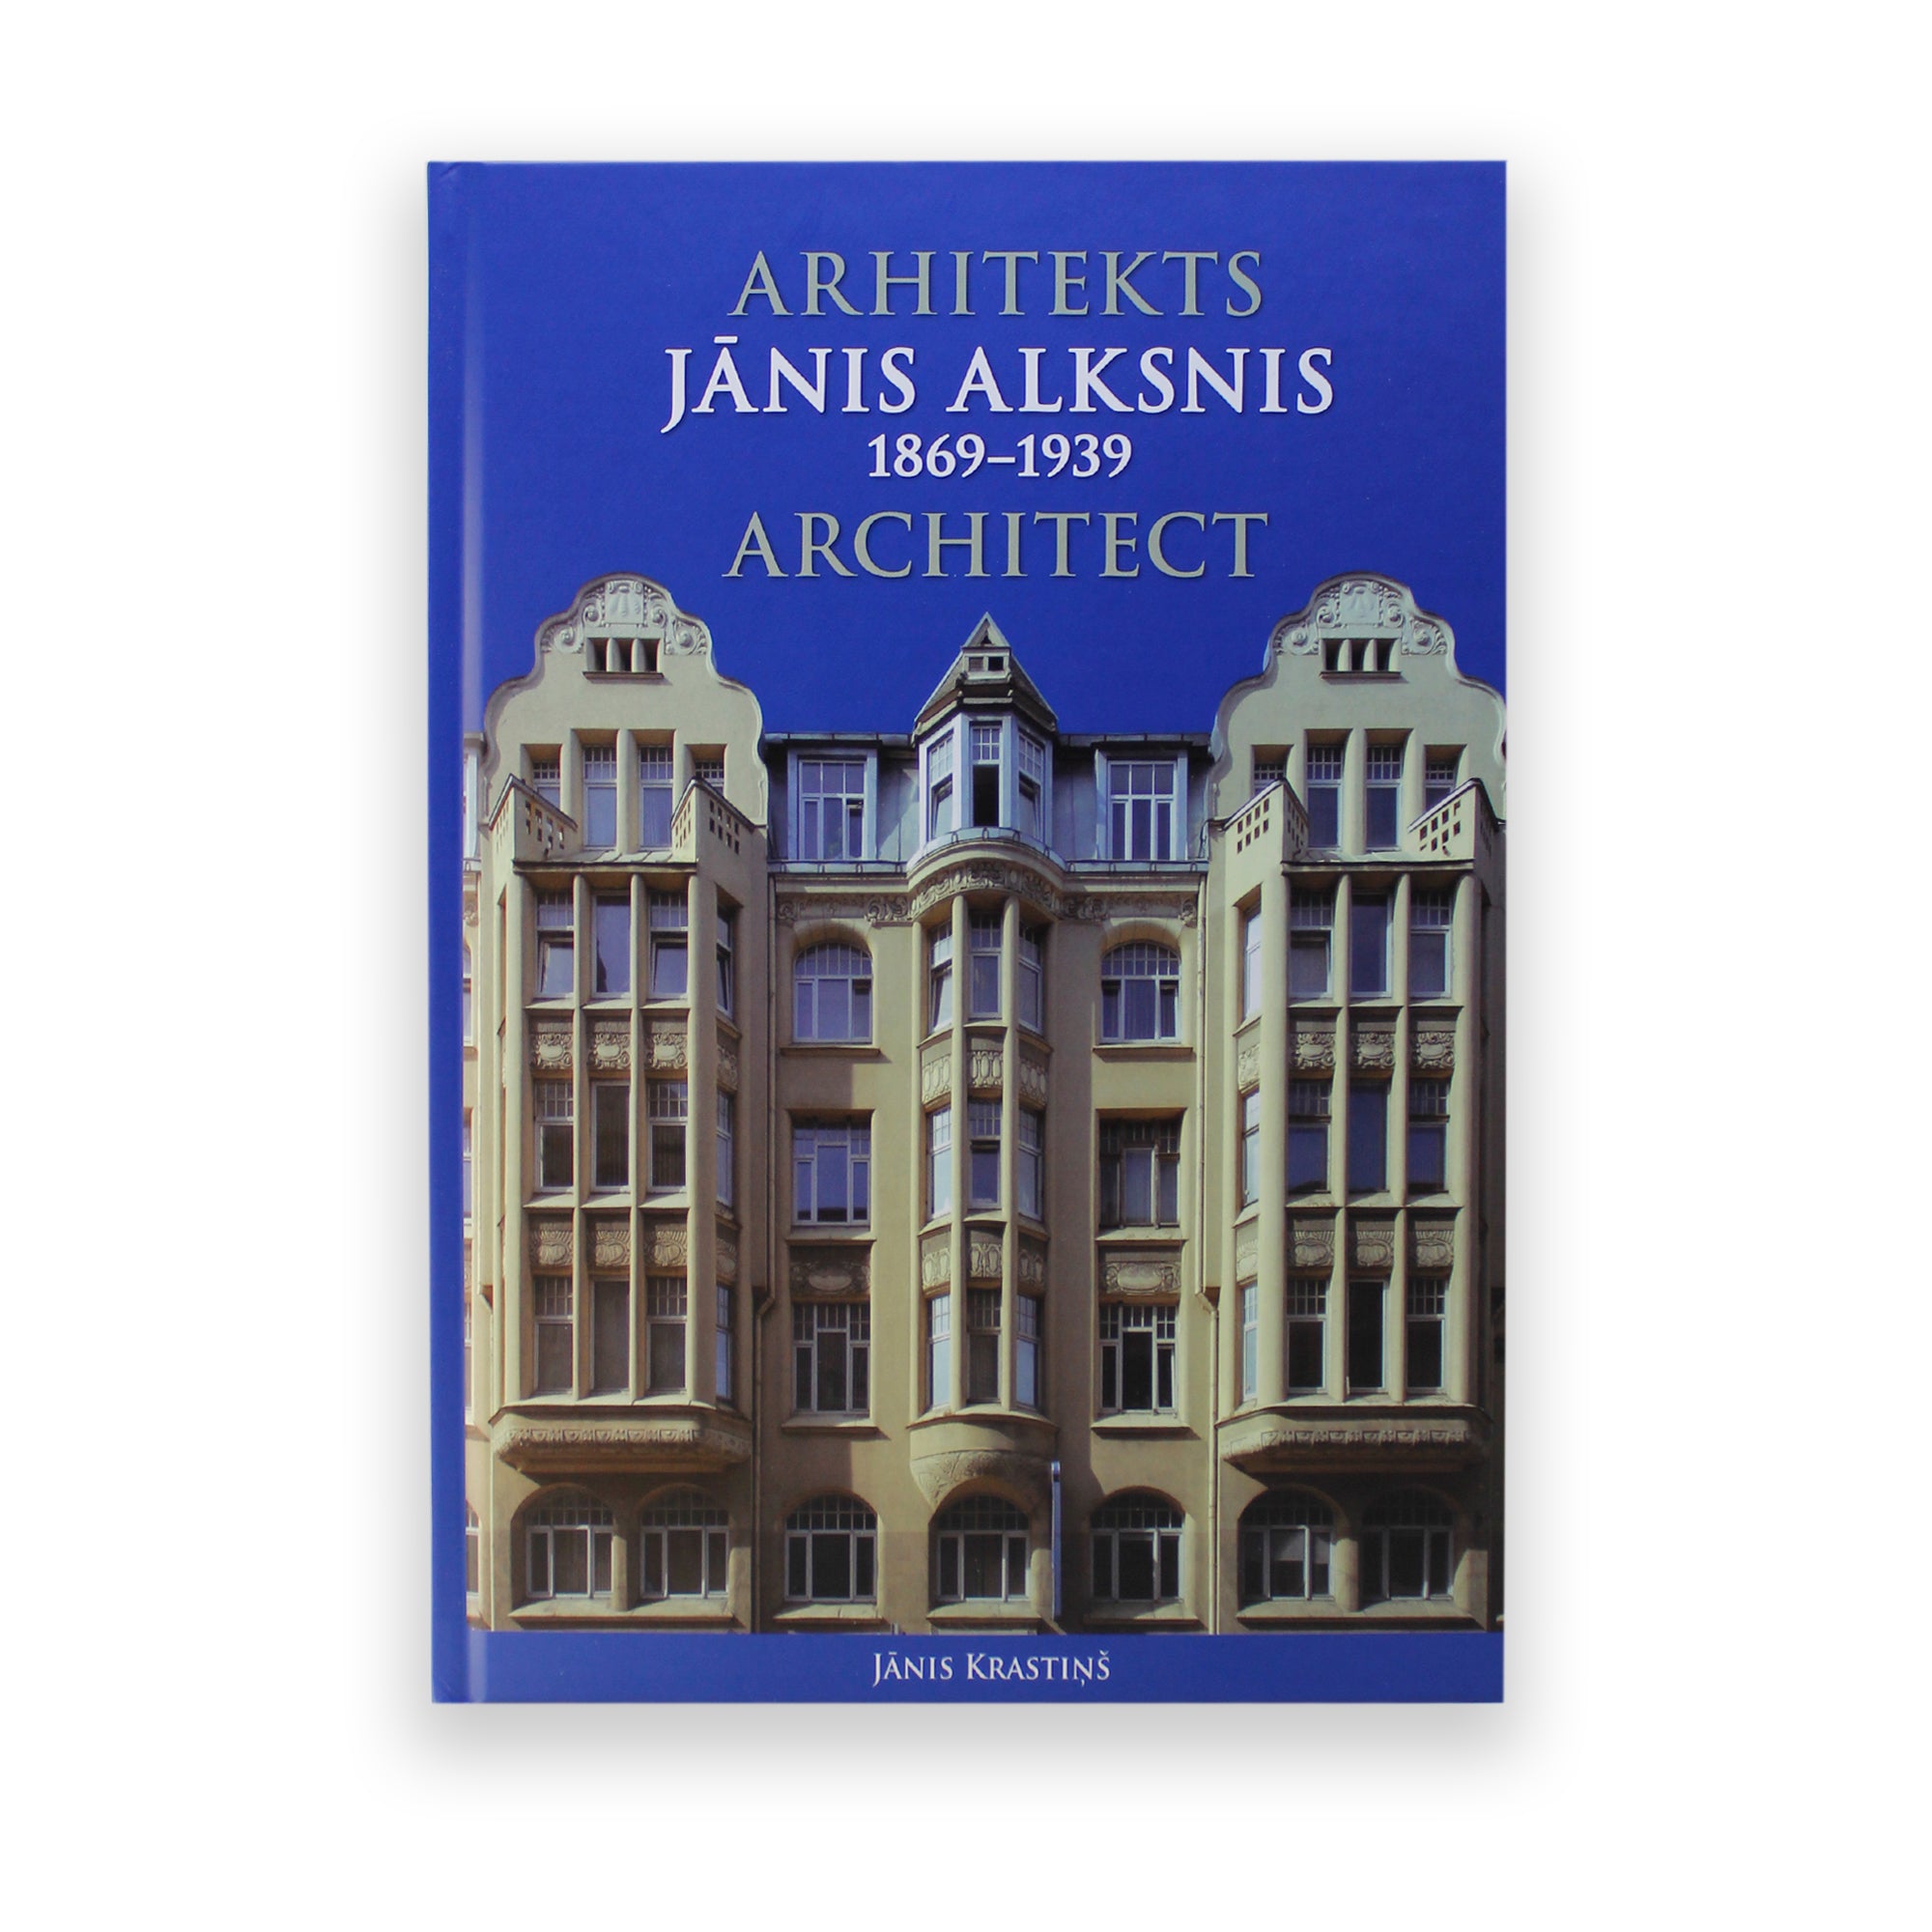 Janis Alksnis - The Architect